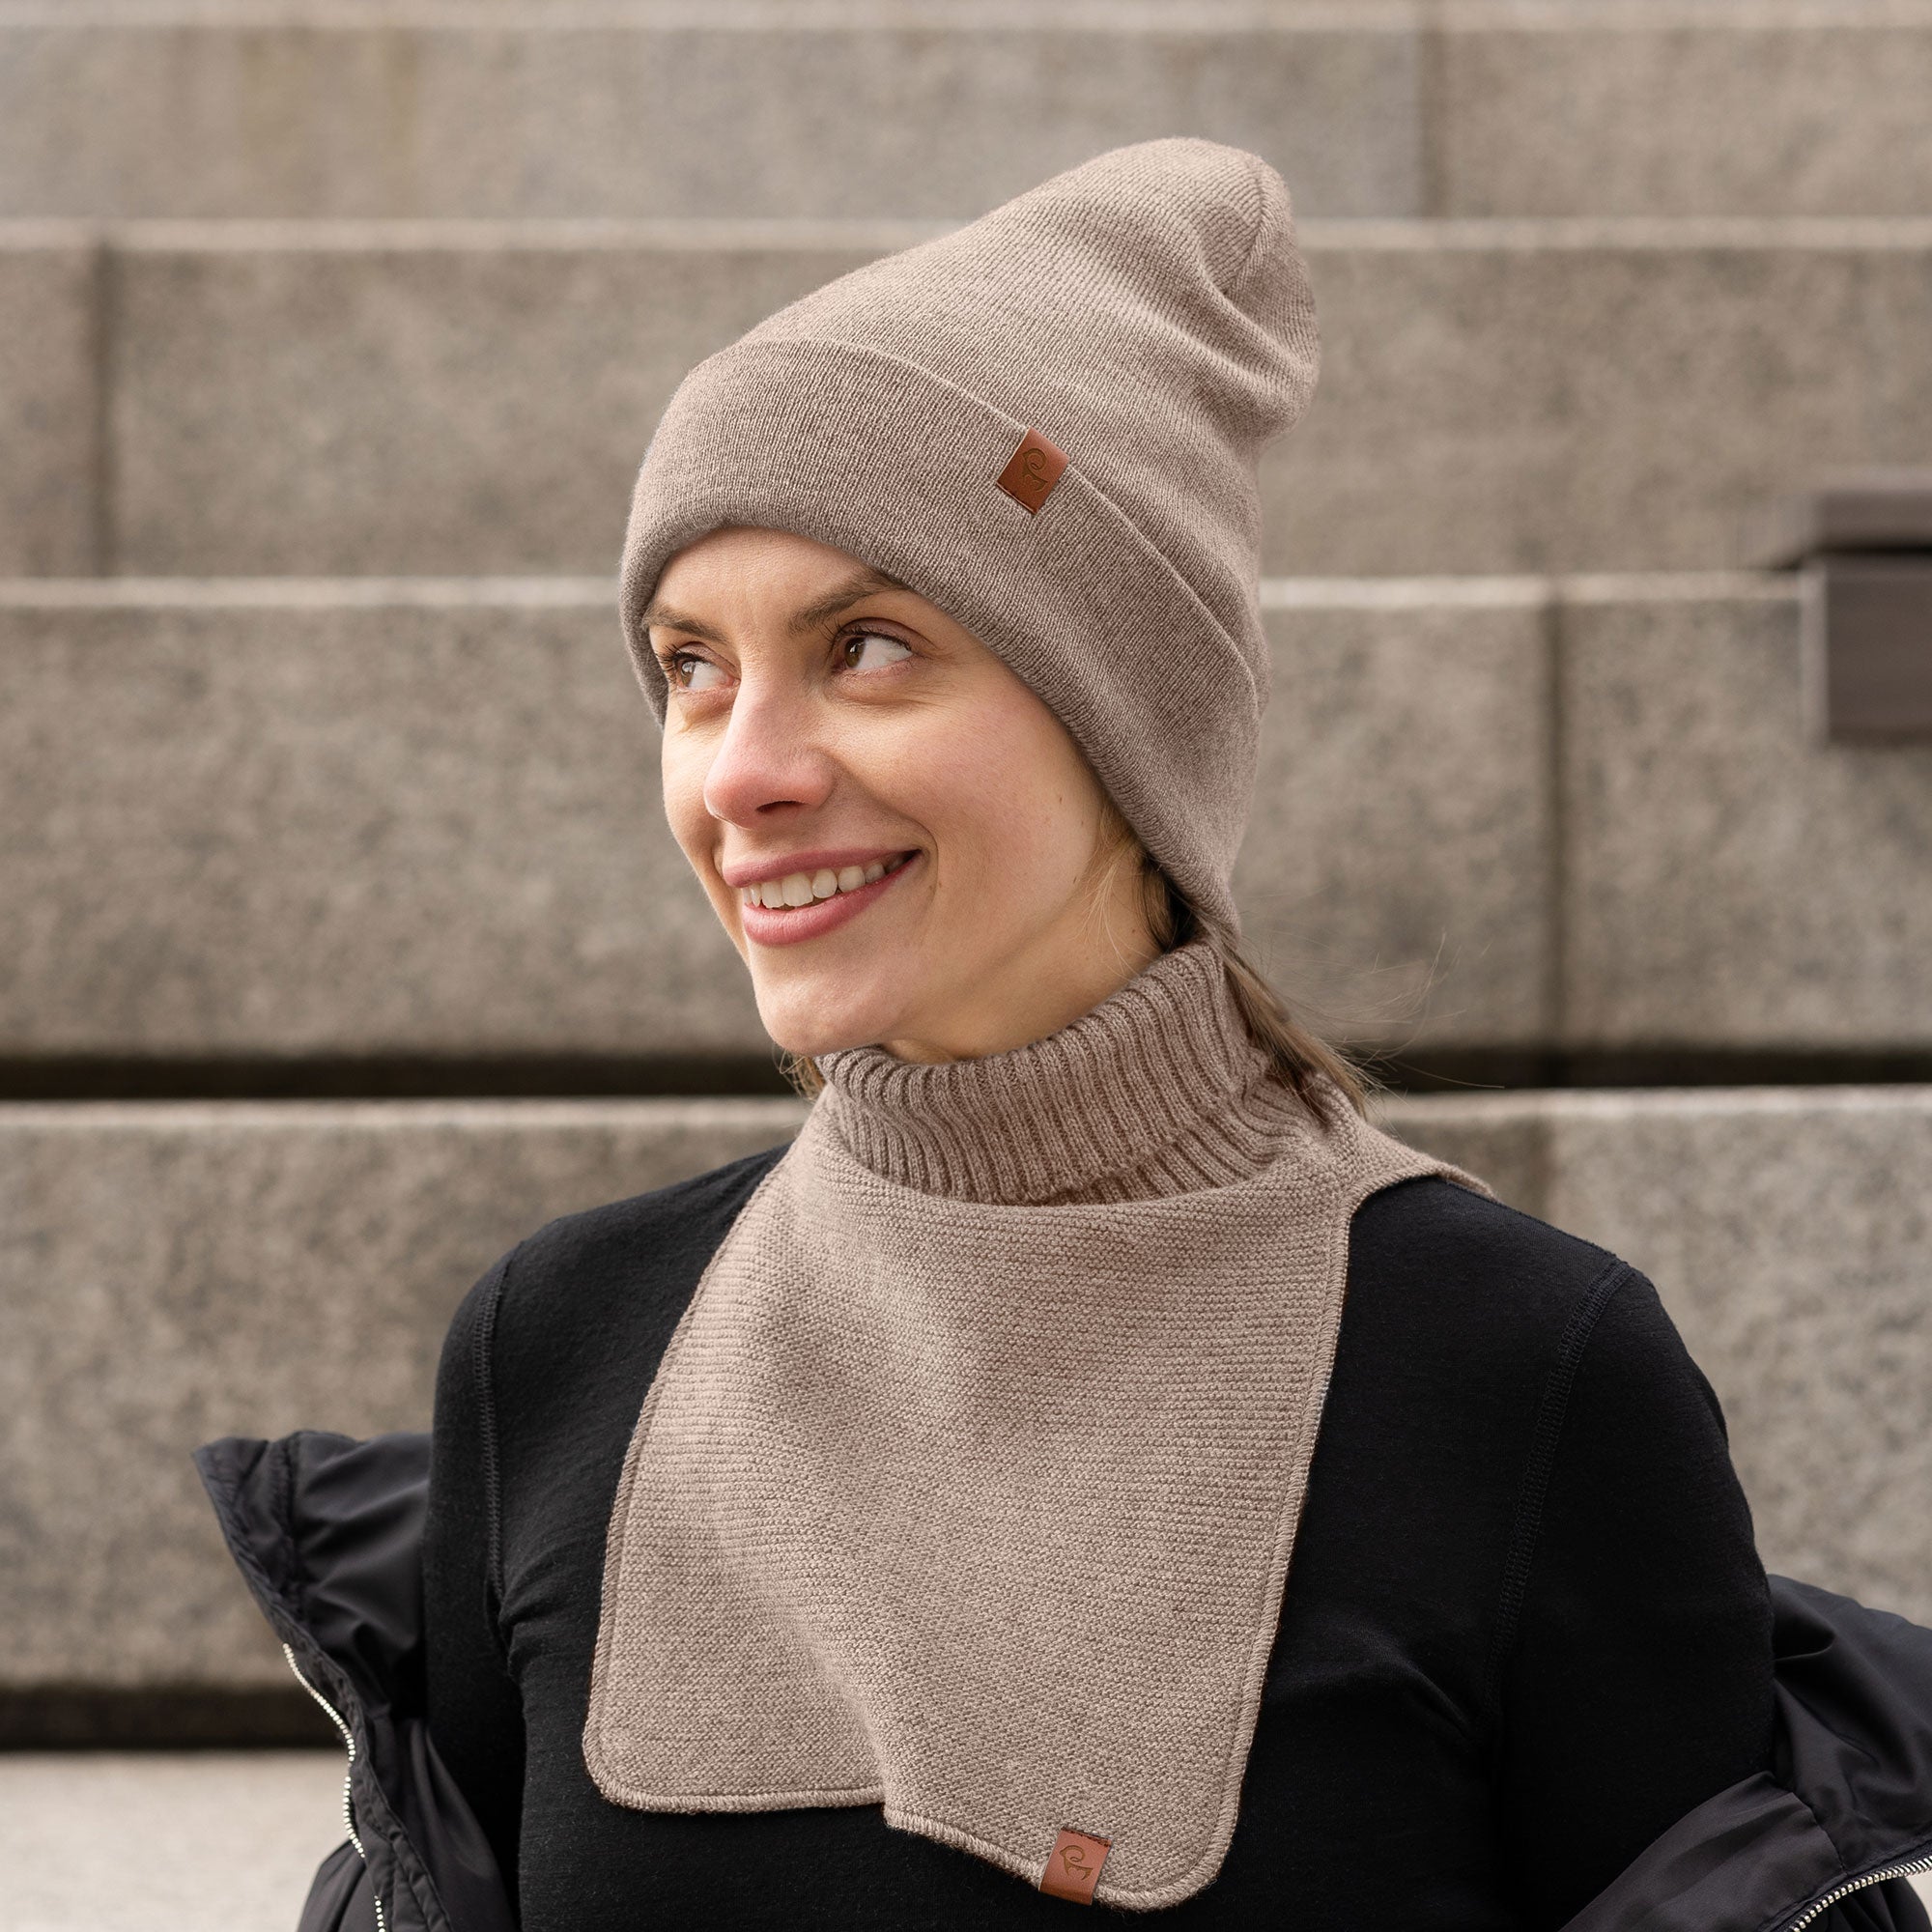 Clothes & Roads, Merino Wool Infinity Scarf